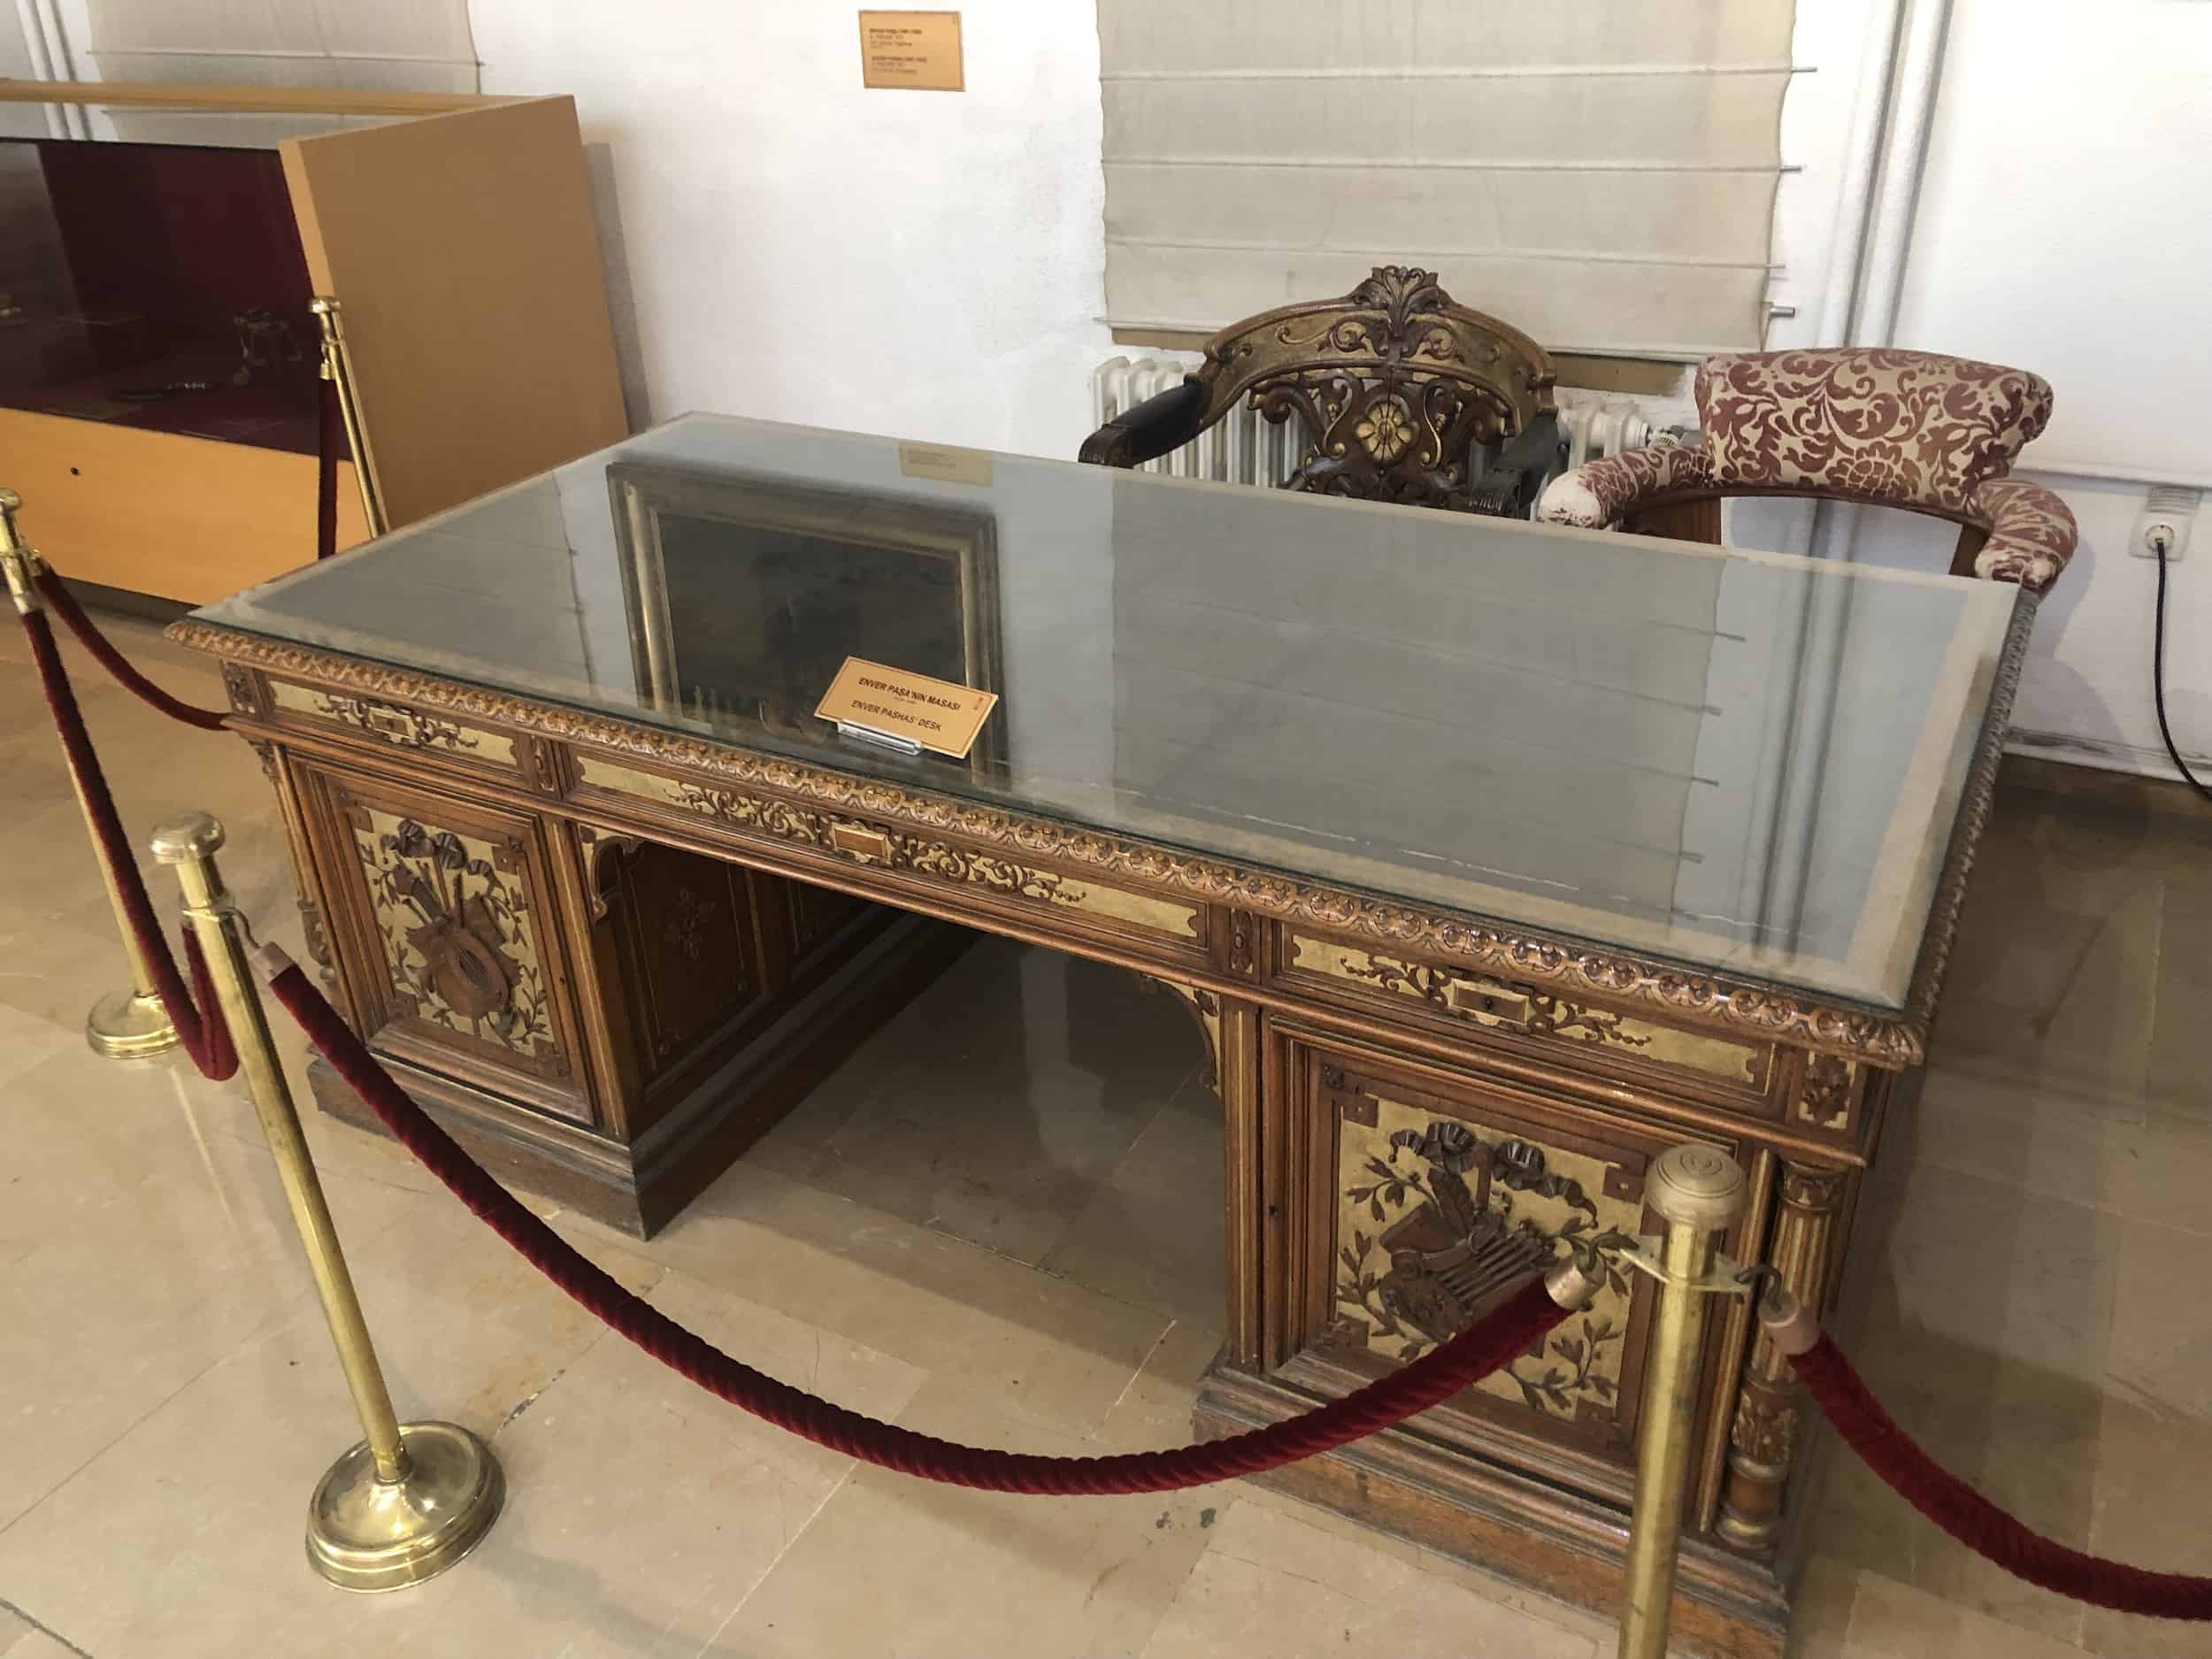 Desk belonging to Enver Pasha in the Constitutional Period Hall at the Harbiye Military Museum in Istanbul, Turkey